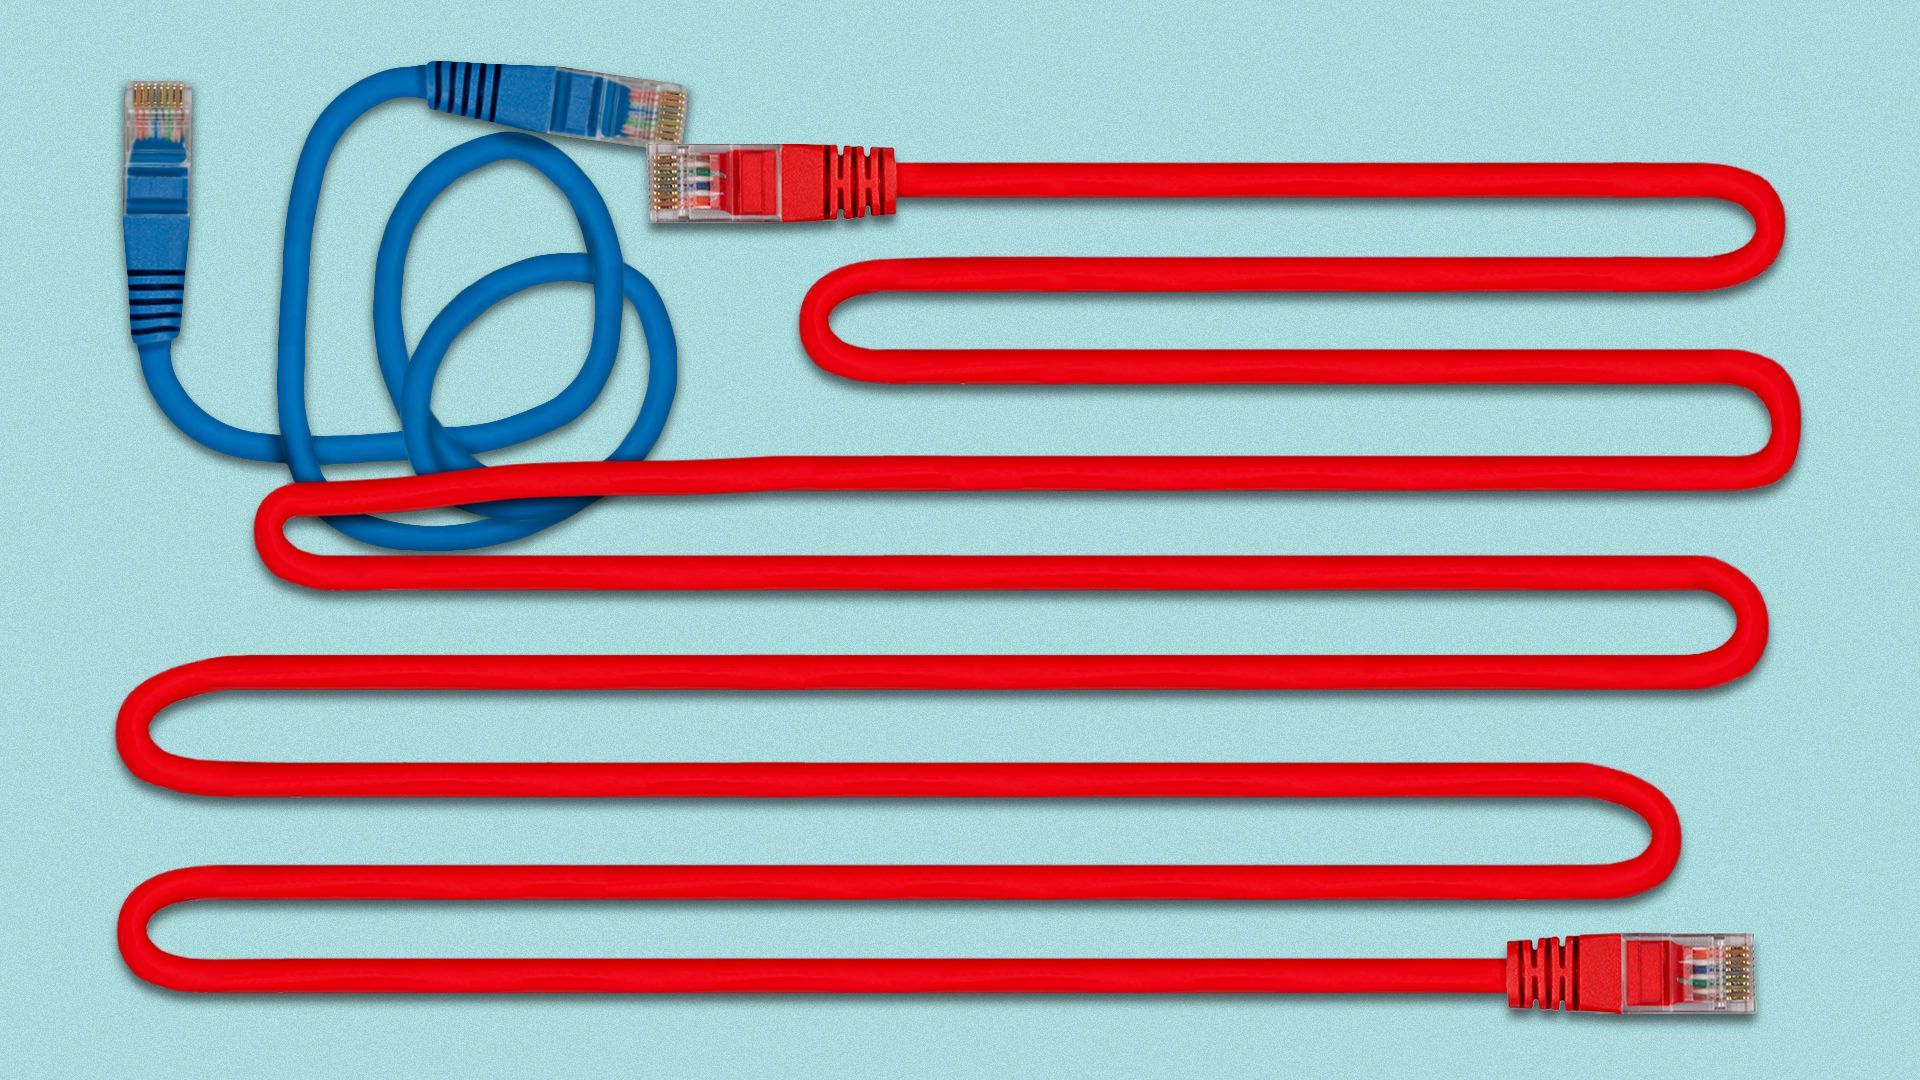 Illustration of ethernet cables arranged to look like the U.S. flag